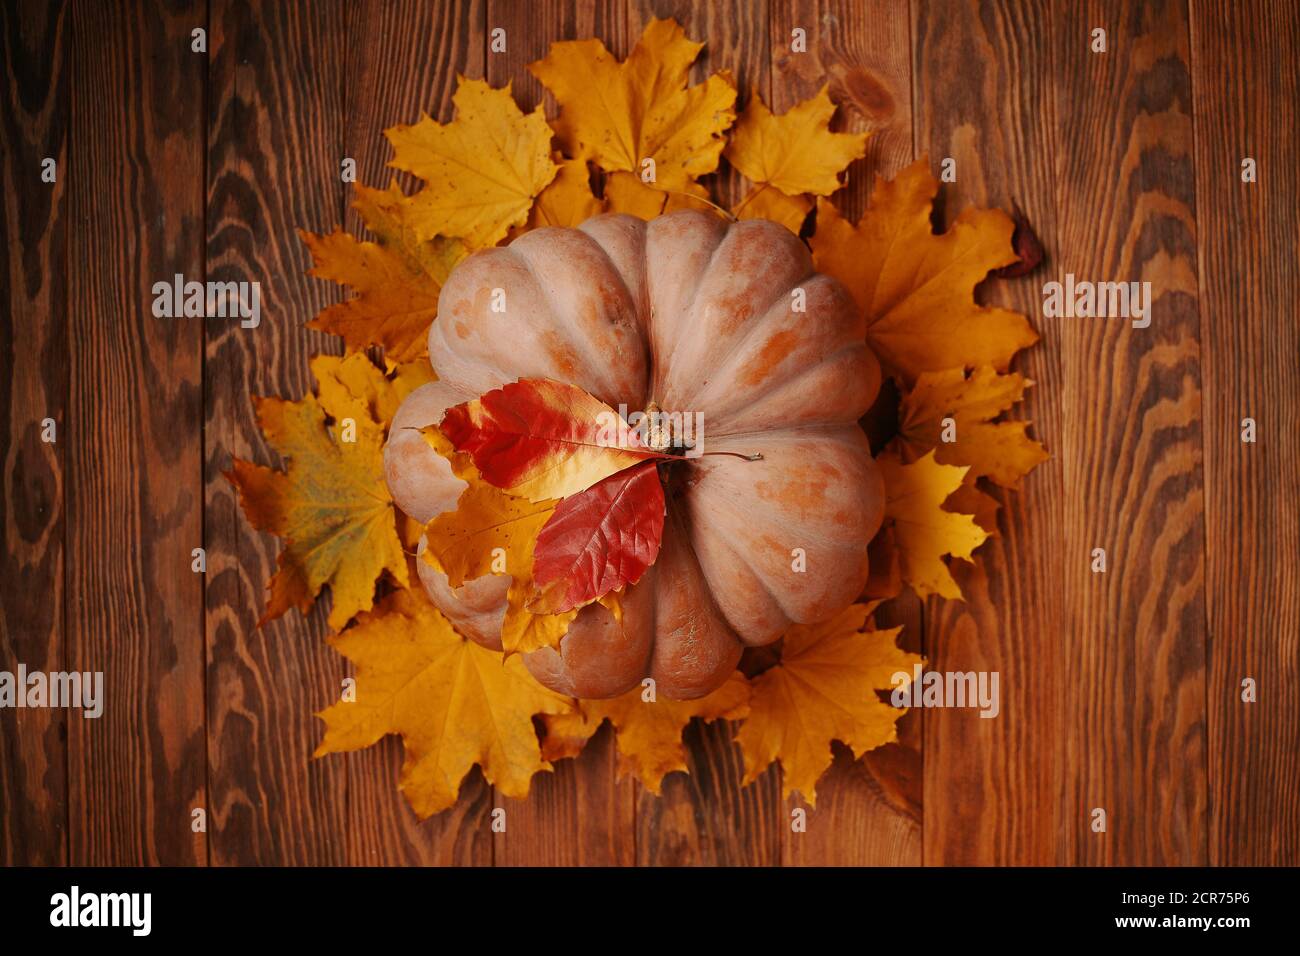 Ripe pumpkin on colorful autumn leaves. Pumpkin and leaves on a wooden background. Warm fall atmosphere. Stock Photo